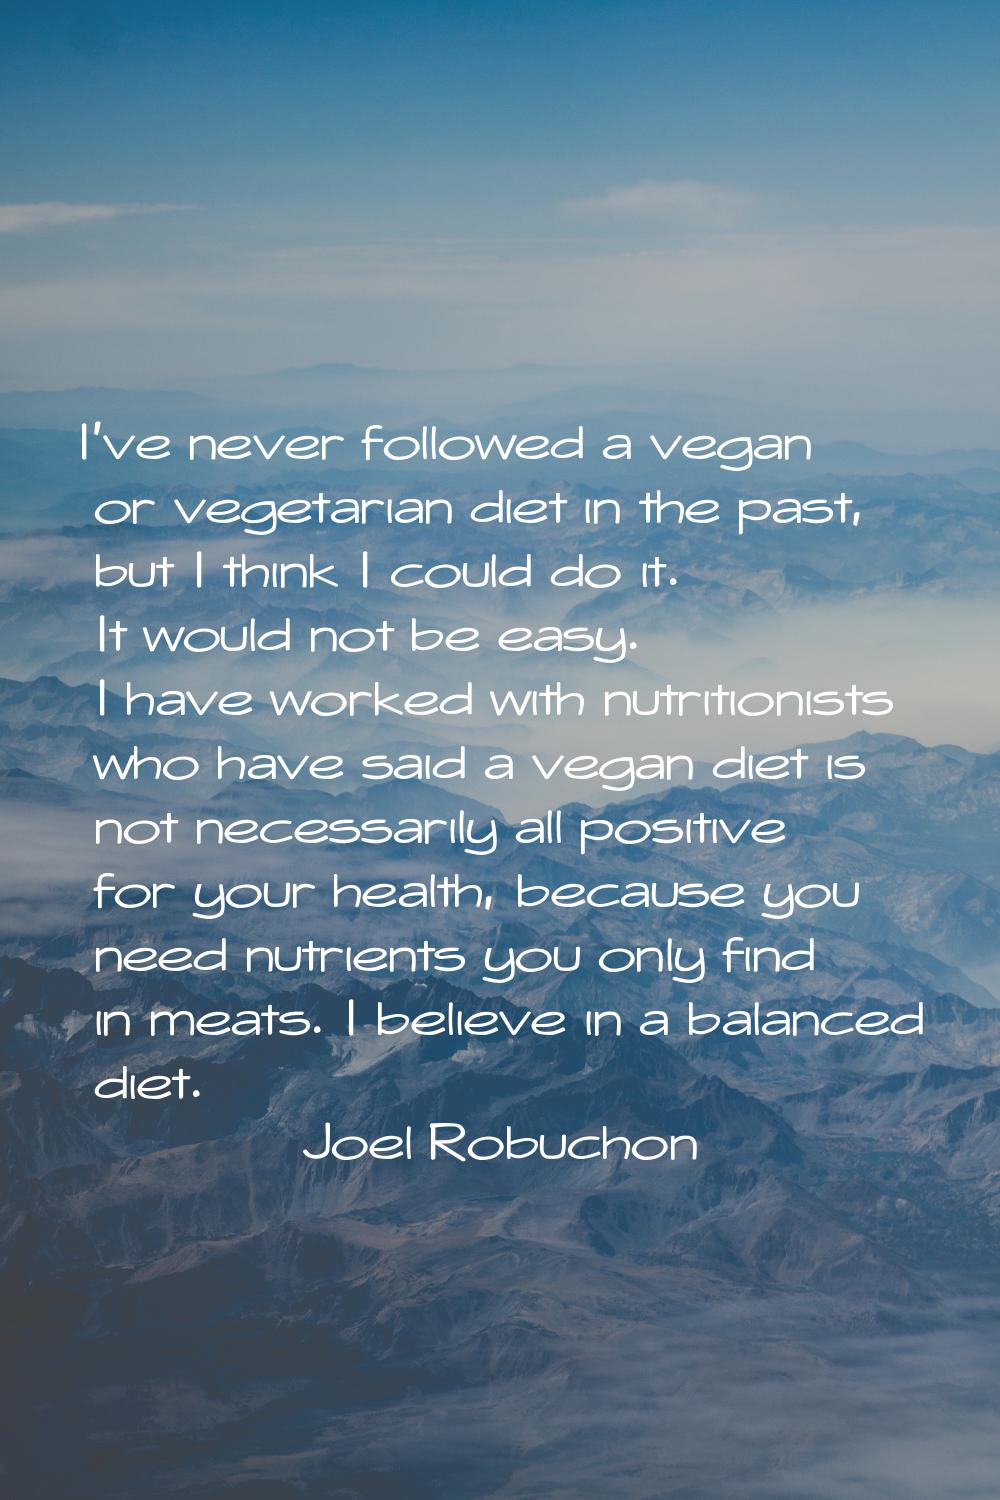 I've never followed a vegan or vegetarian diet in the past, but I think I could do it. It would not